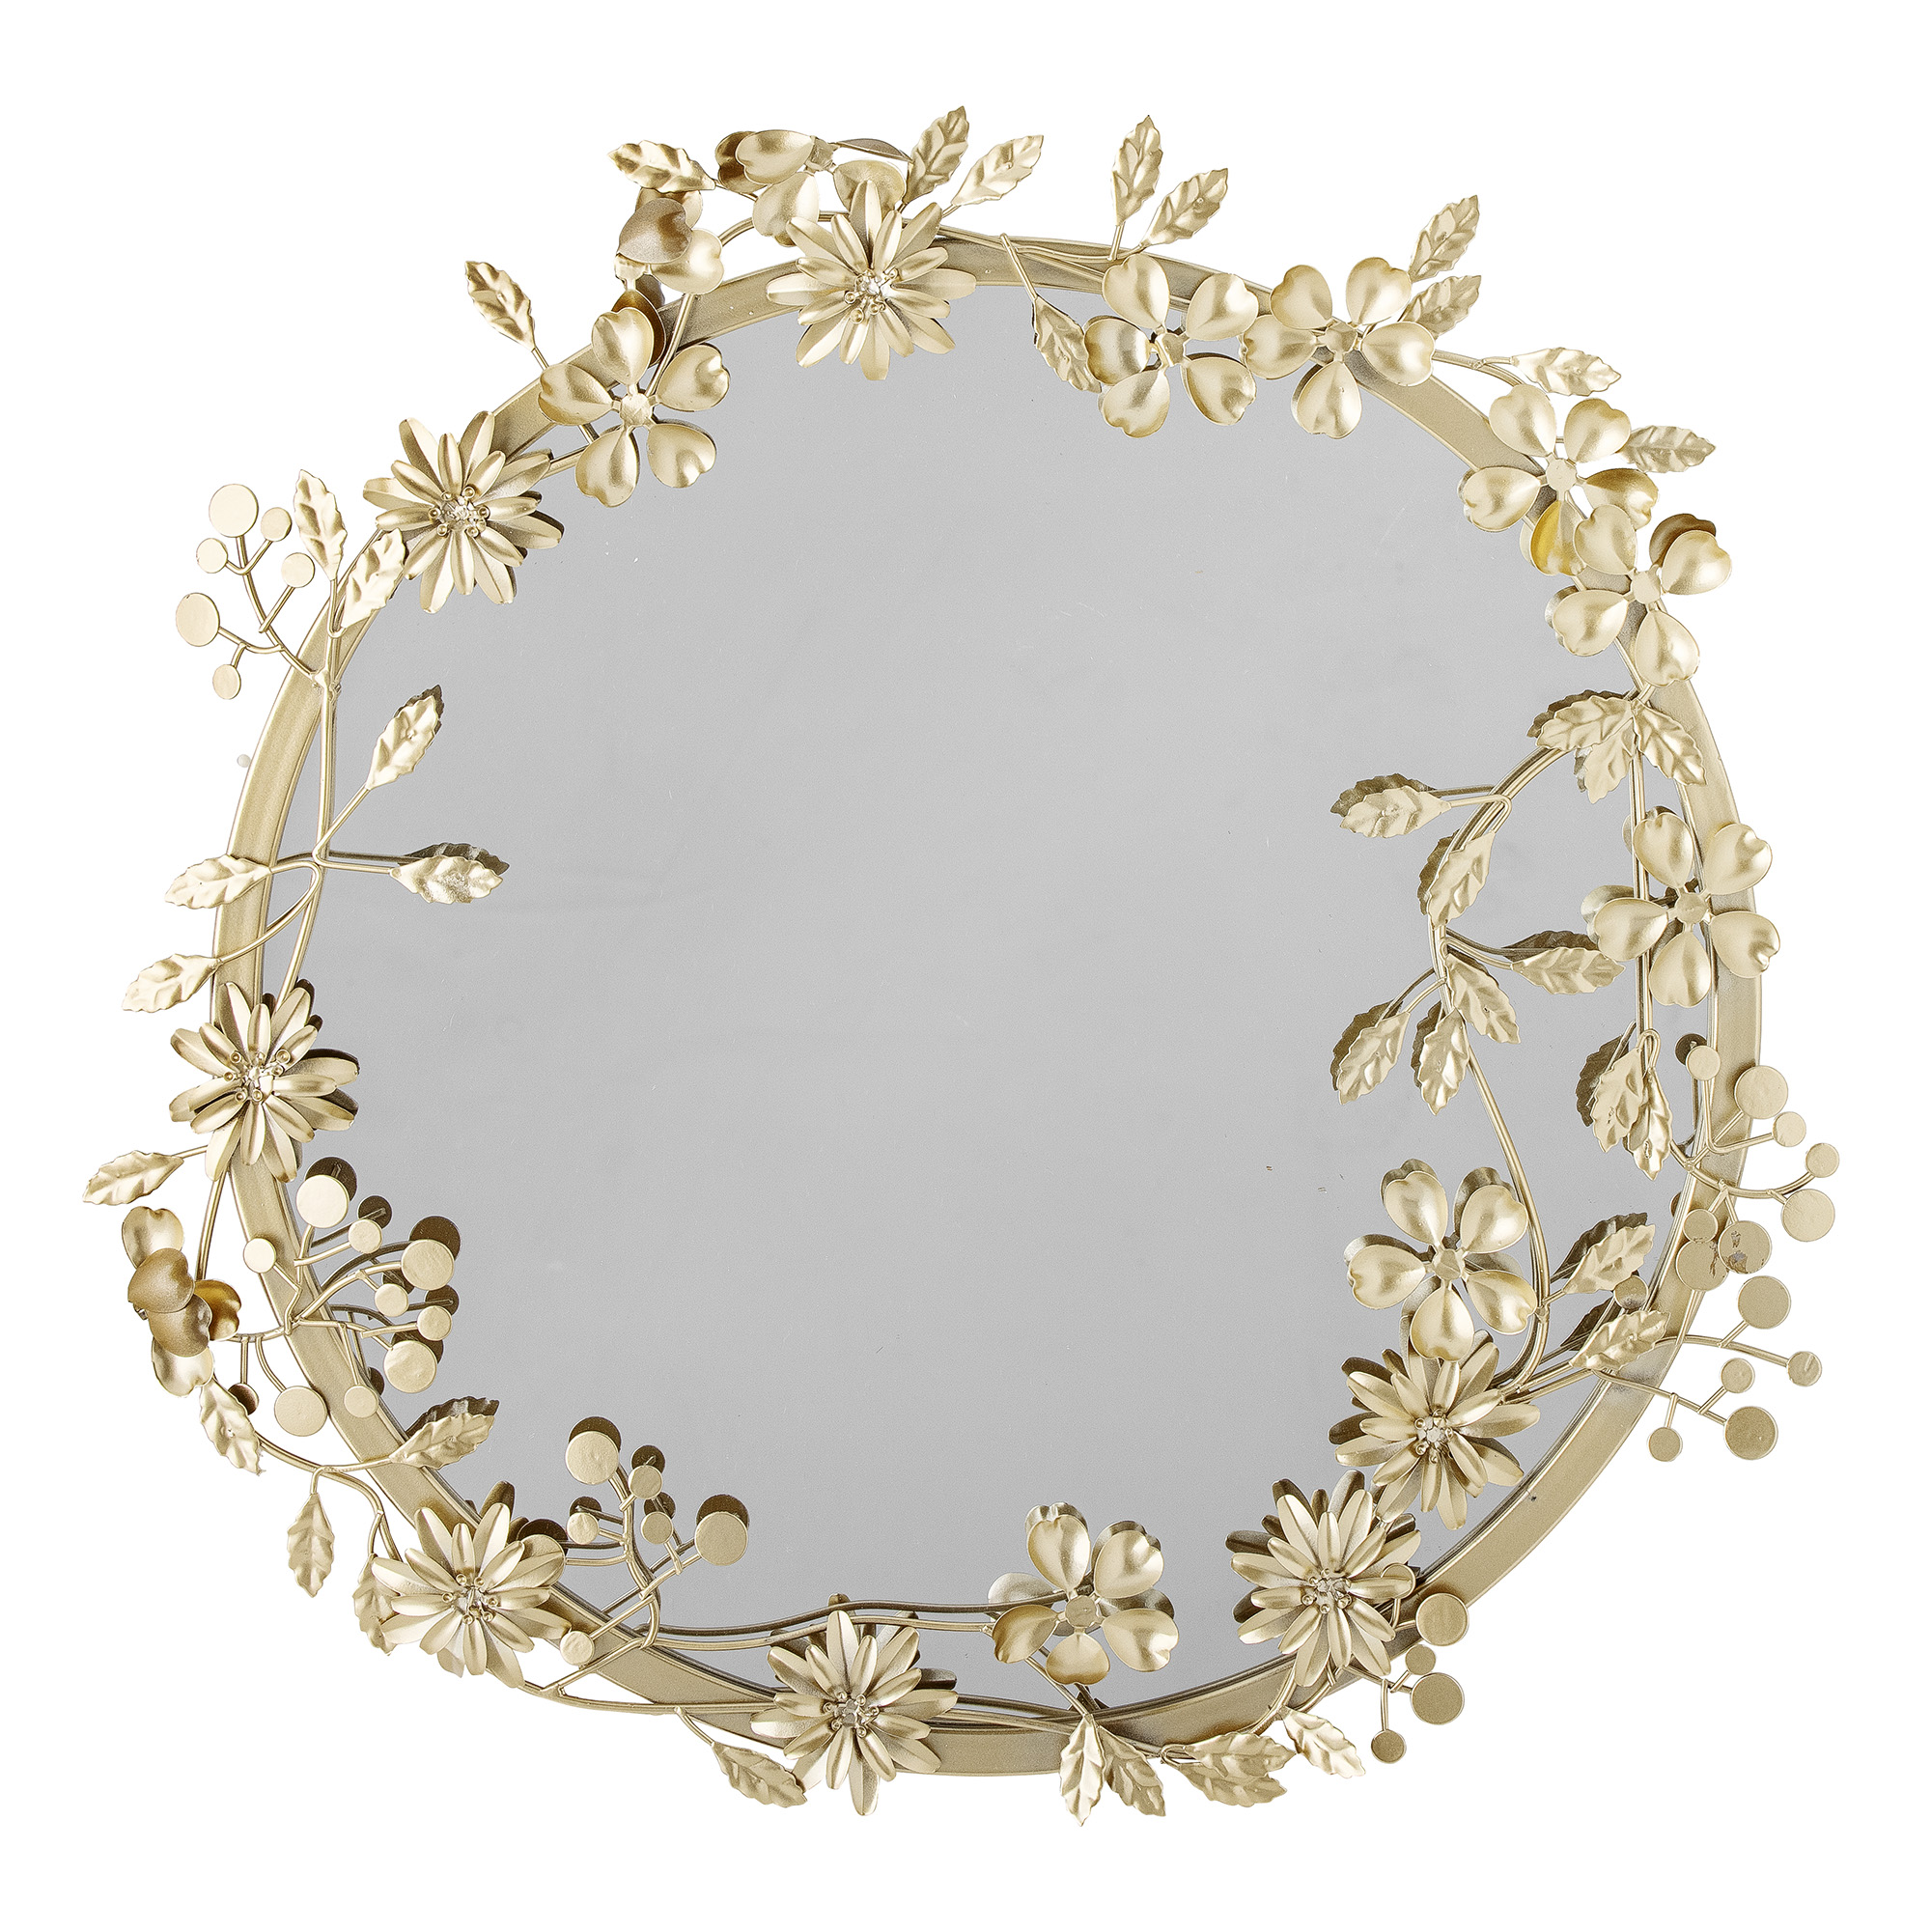 Creative Collection - Jenne Wall Mirror, Brass, Metal (82059661)